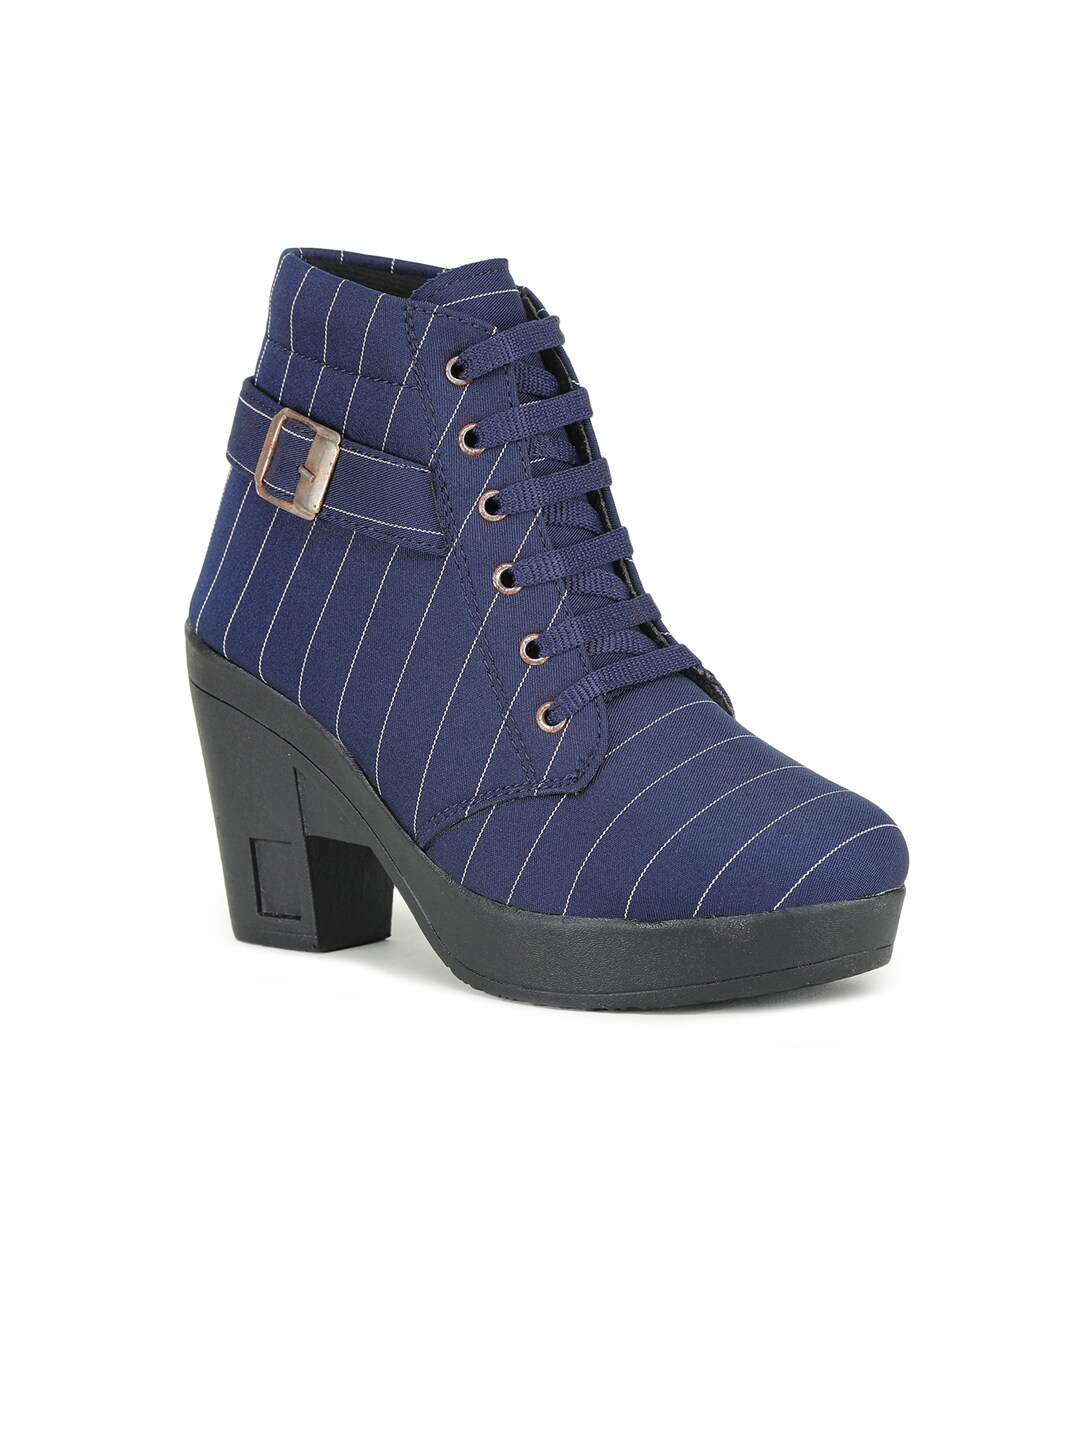 SAPATOS Women Navy Blue Printed Boots Price in India